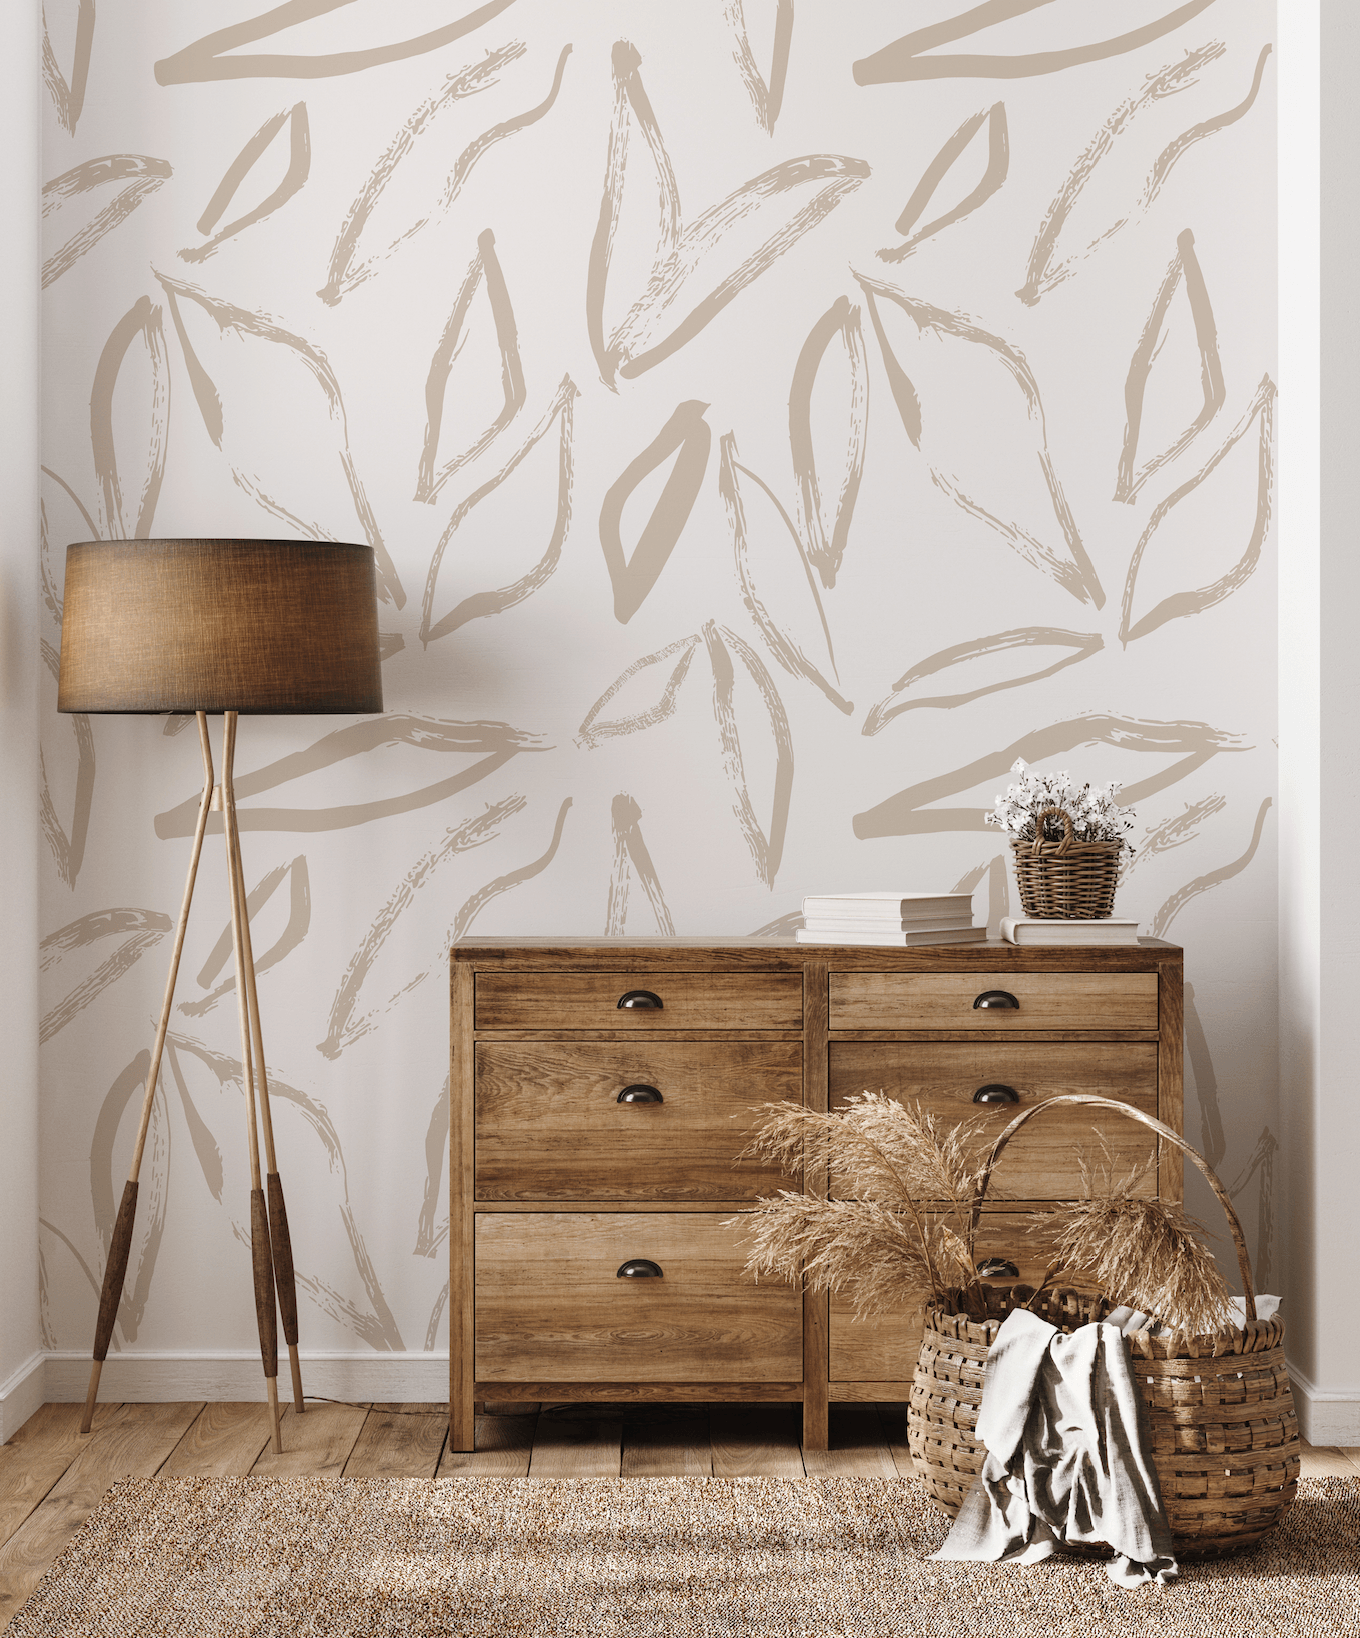 Nutmeg Leaves Removable Wallpaper, Rocky Mountain Decals